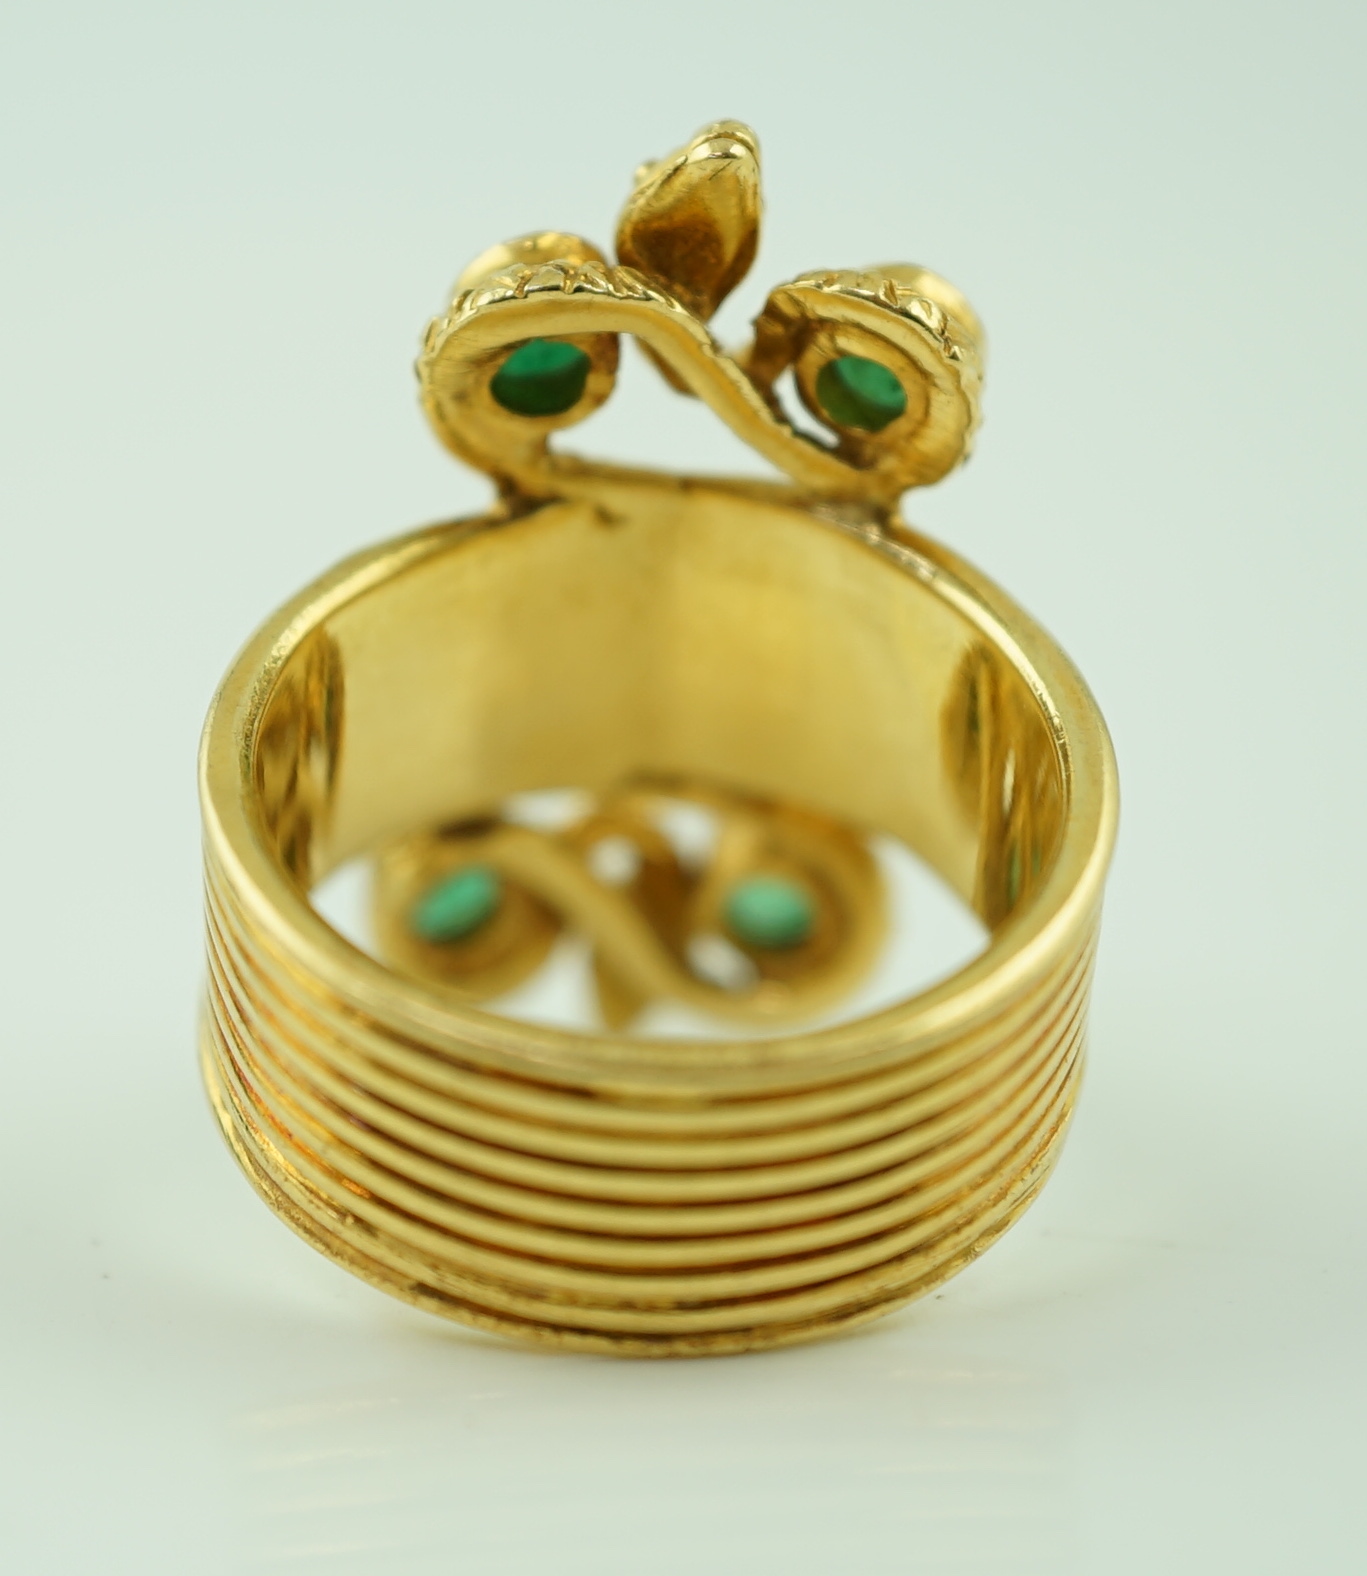 A Ilias Lalaounis 18k gold and four stone emerald set dress ring